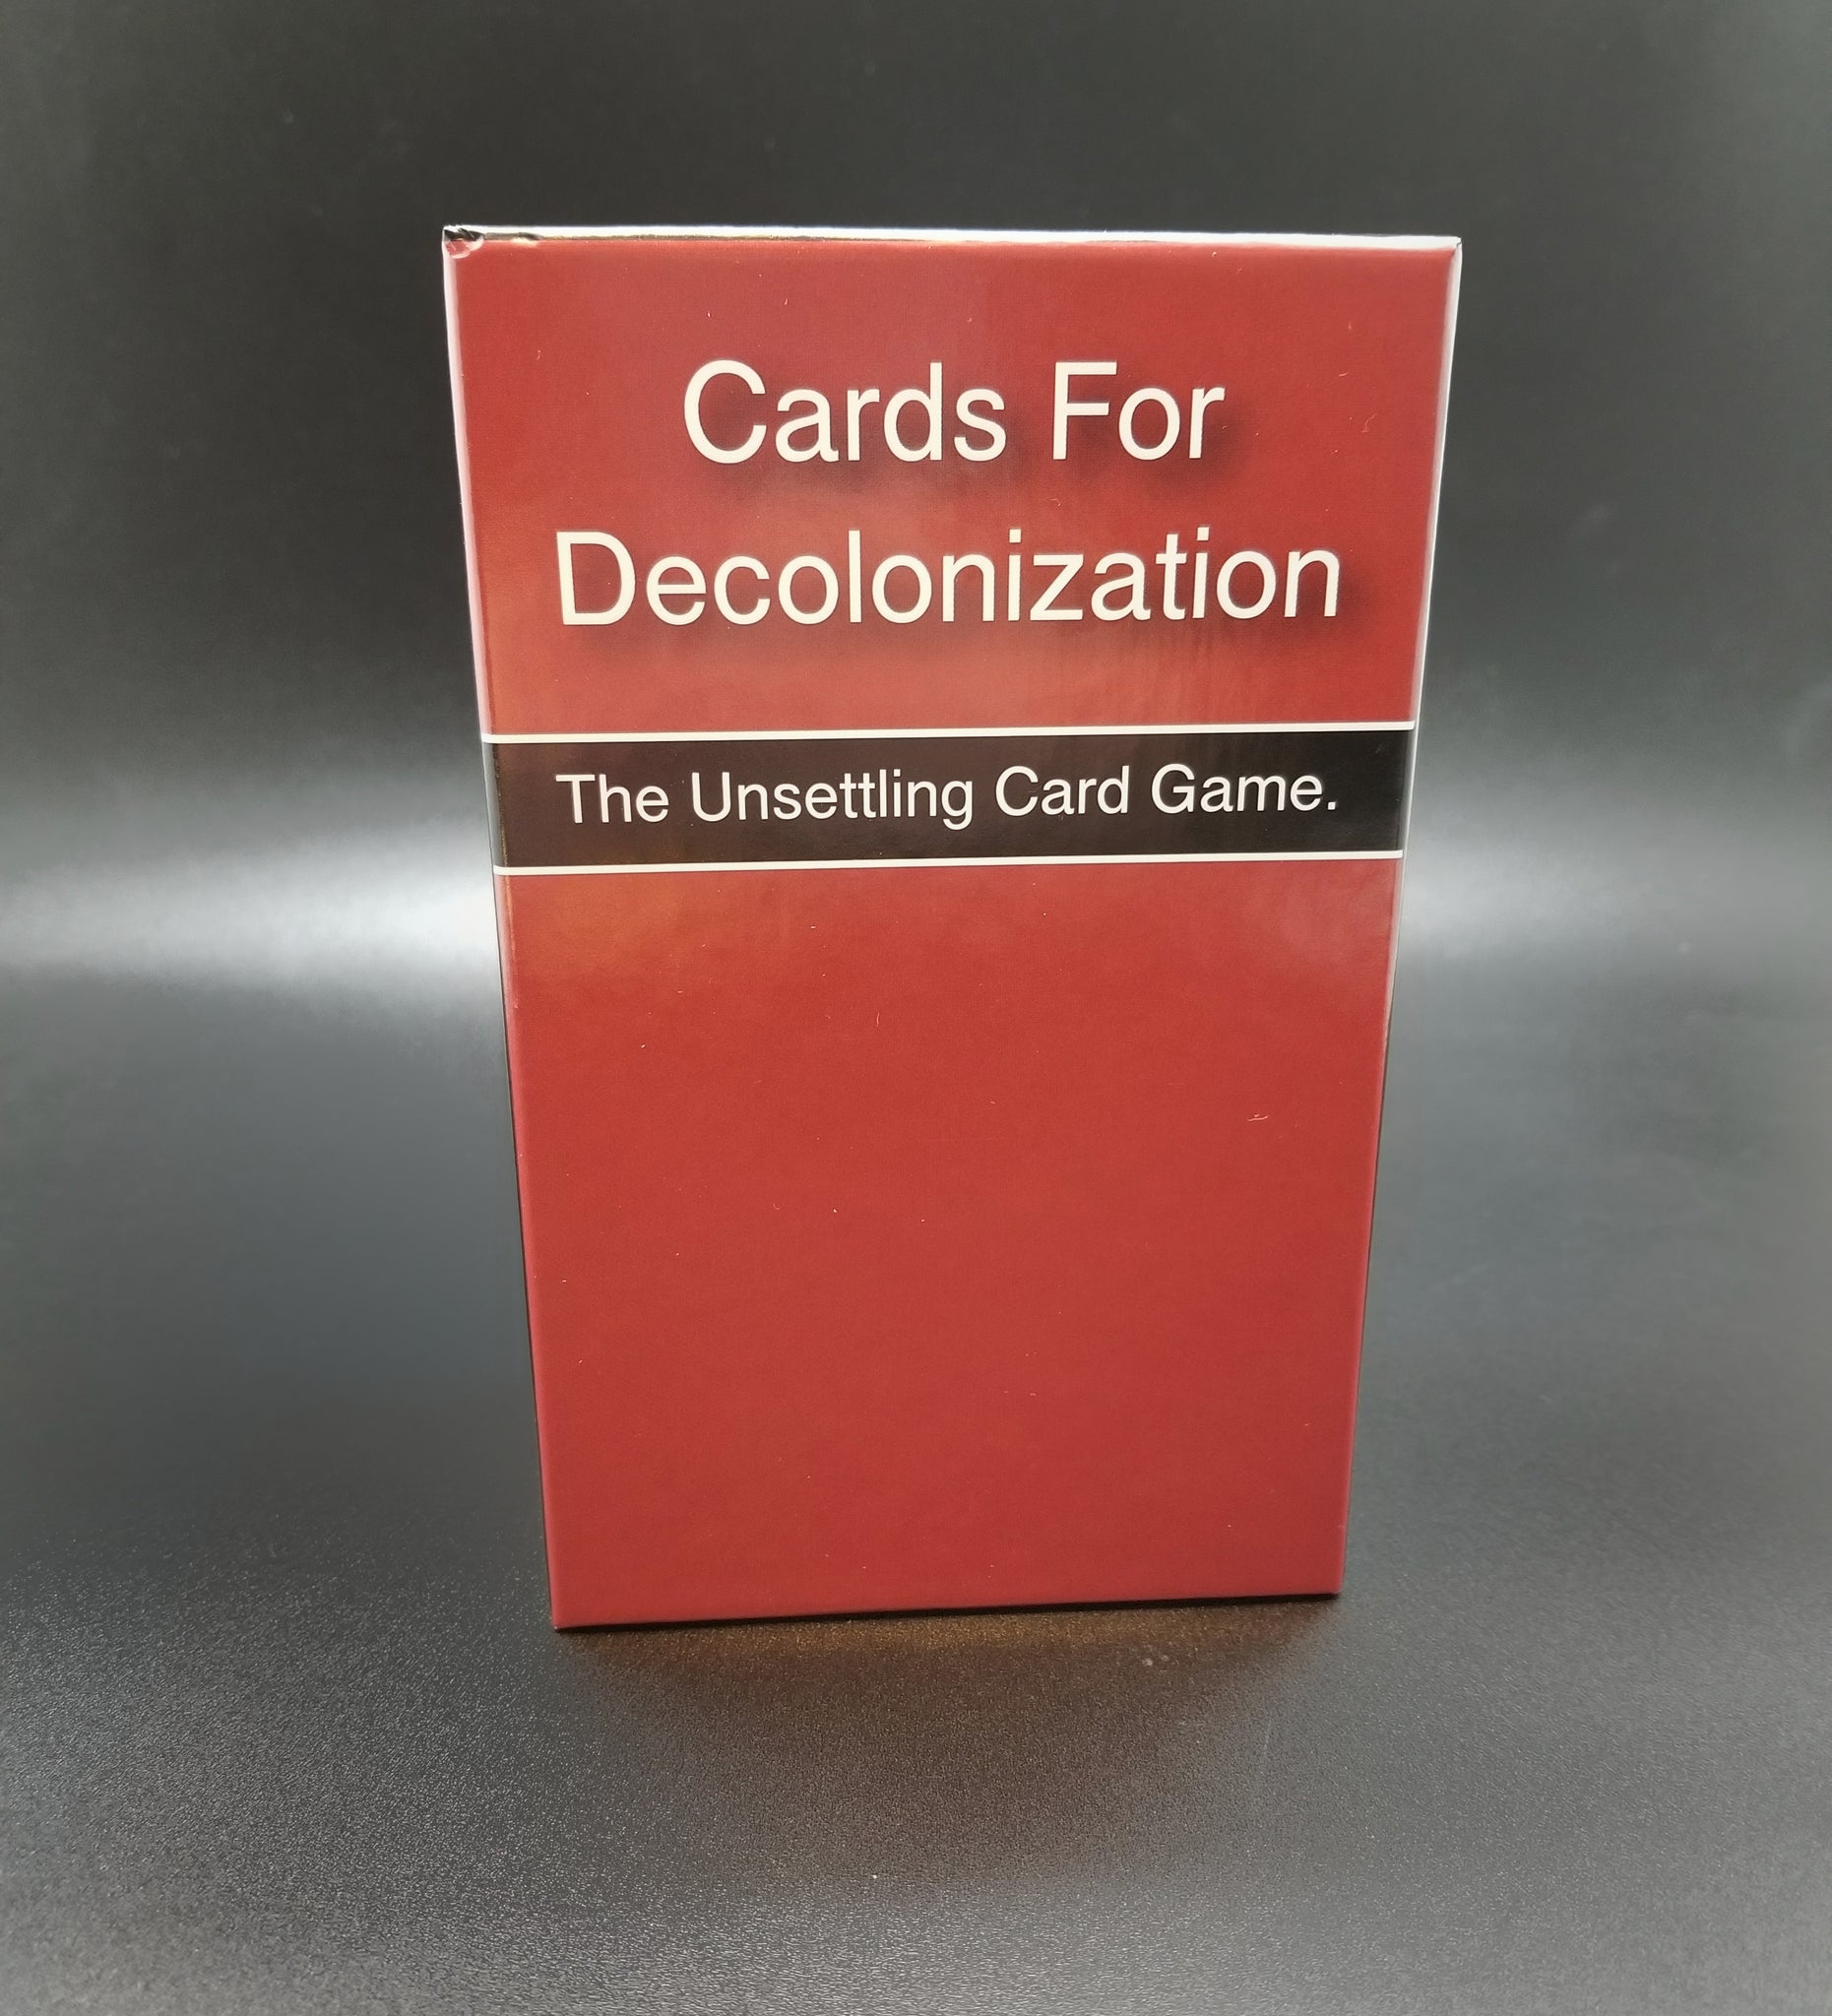 Cards for Decolonization and Expansion Packs